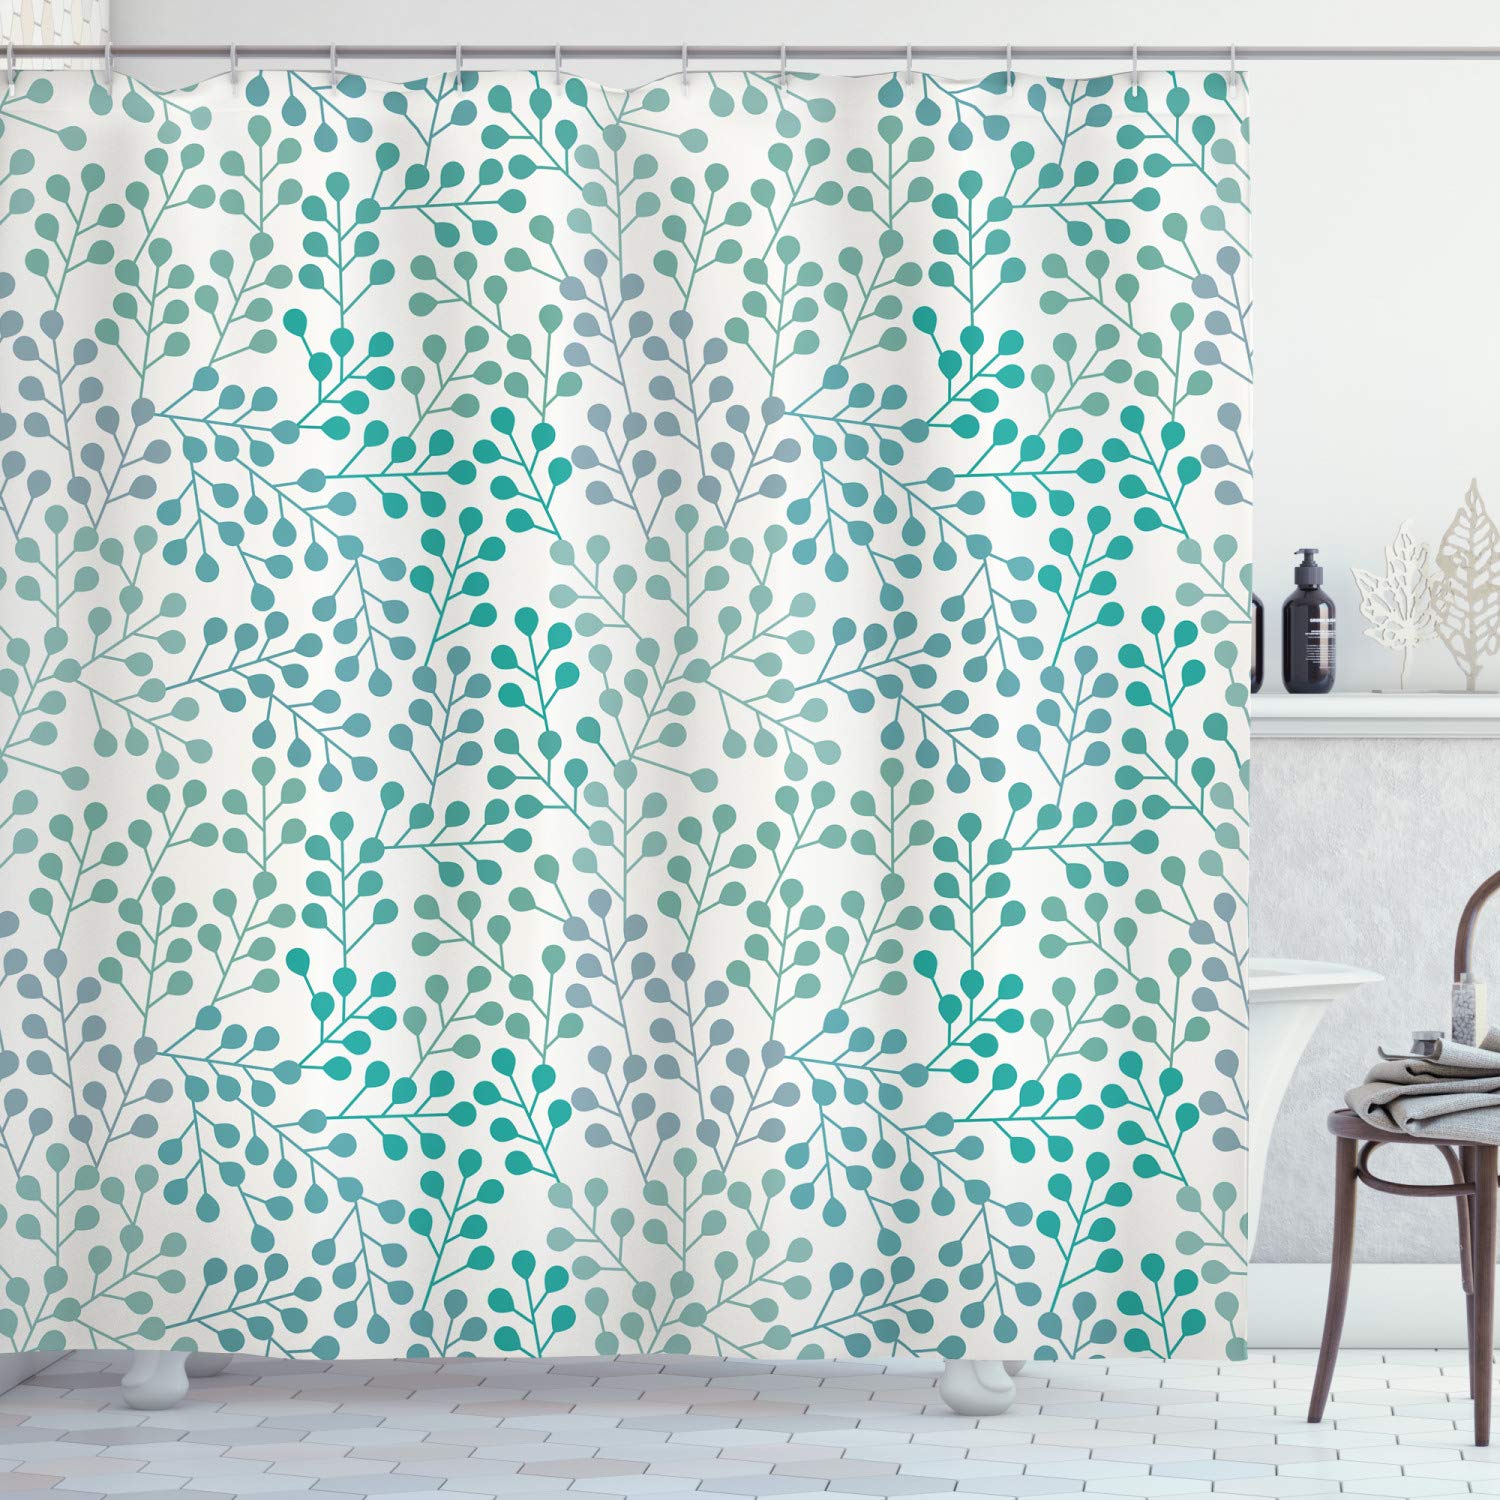 Ambesonne Romance Shower Curtain, Branch in Old Fashioned Romantic Minimalist Style Simplistic Artwork Print, Cloth Fabric Bathroom Decor Set with Hooks, 75" Long, White Teal